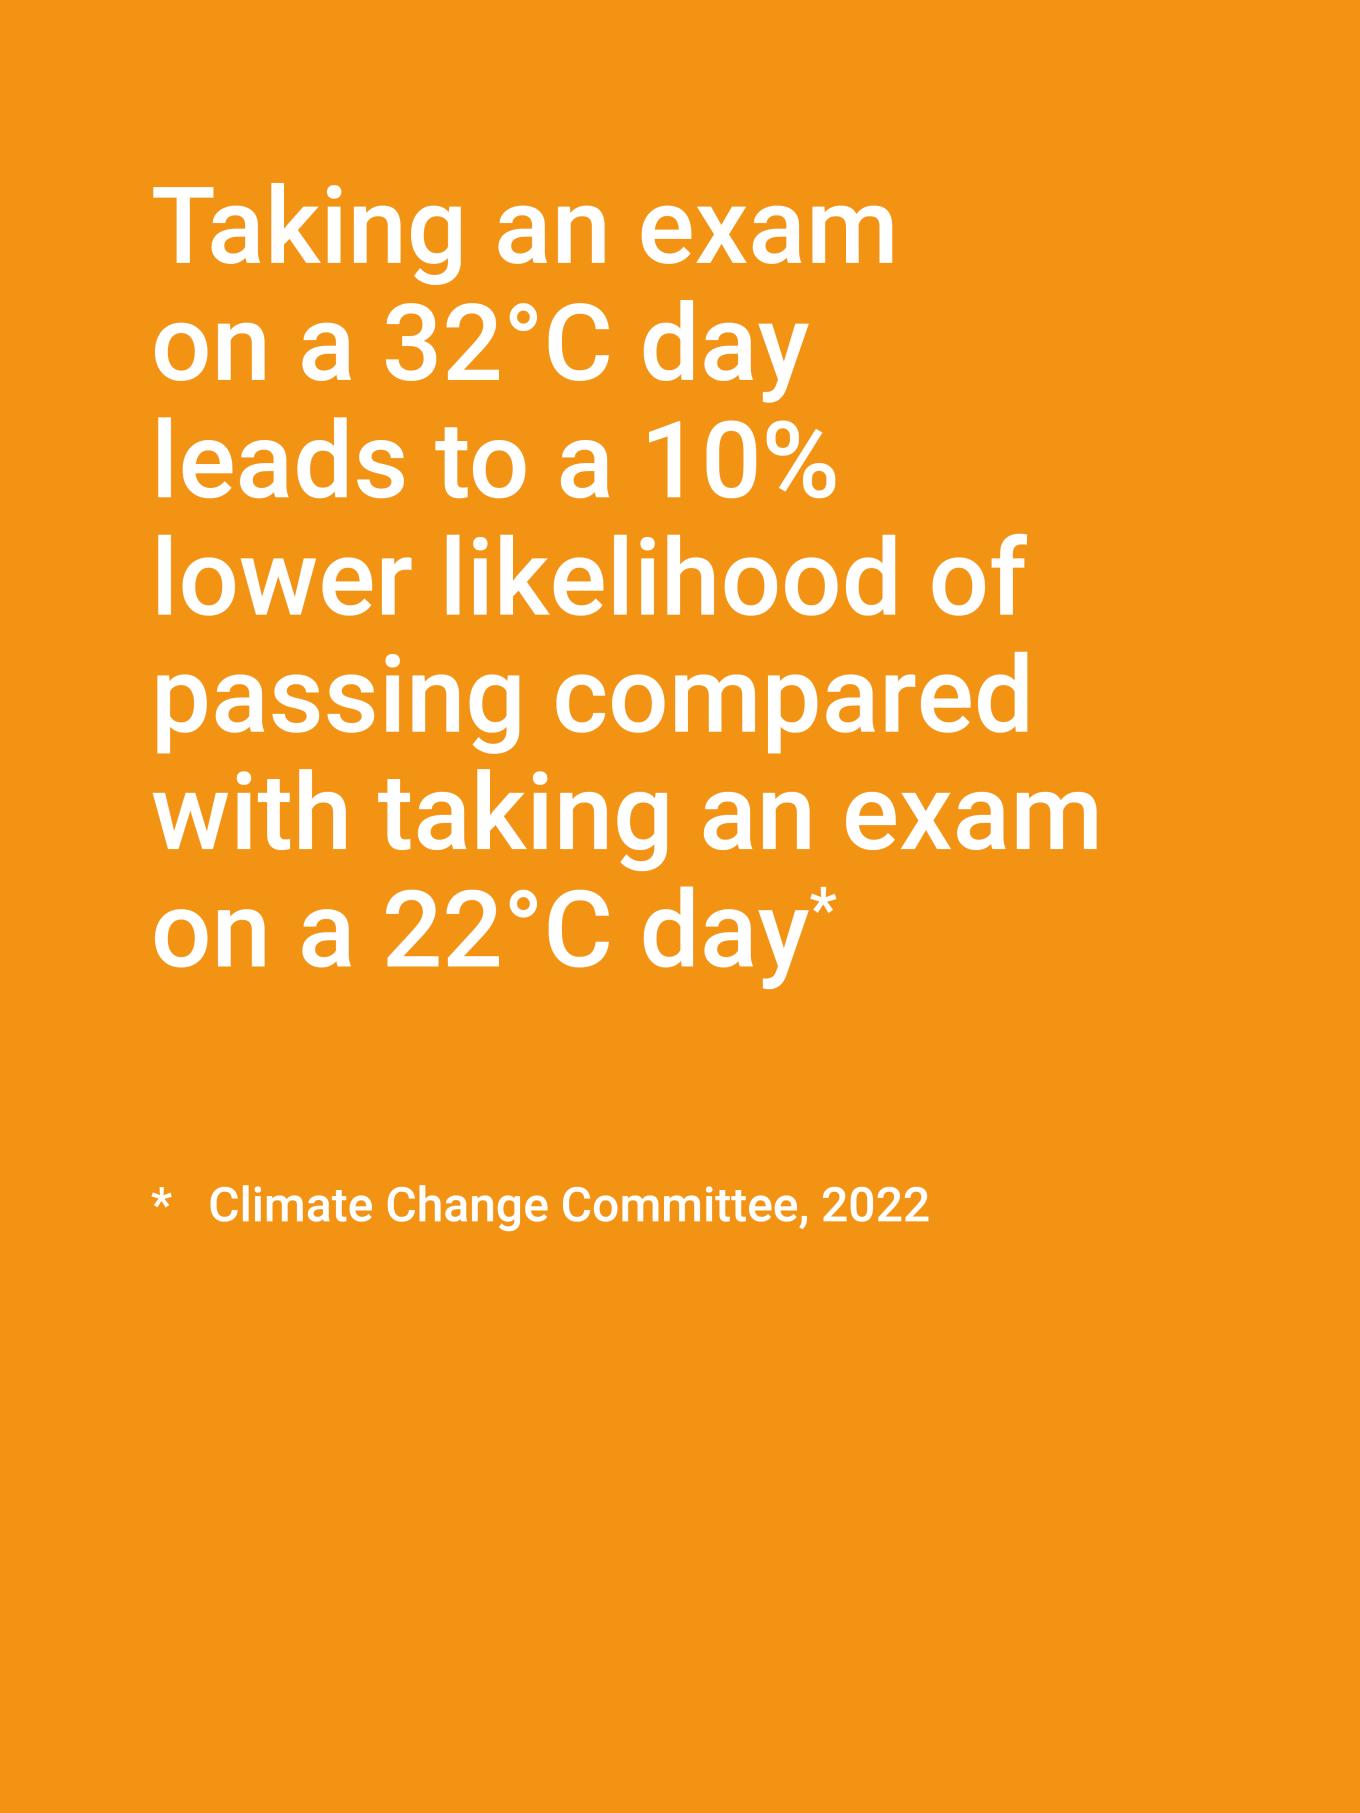 Increase in temperature during exams less likely to pass